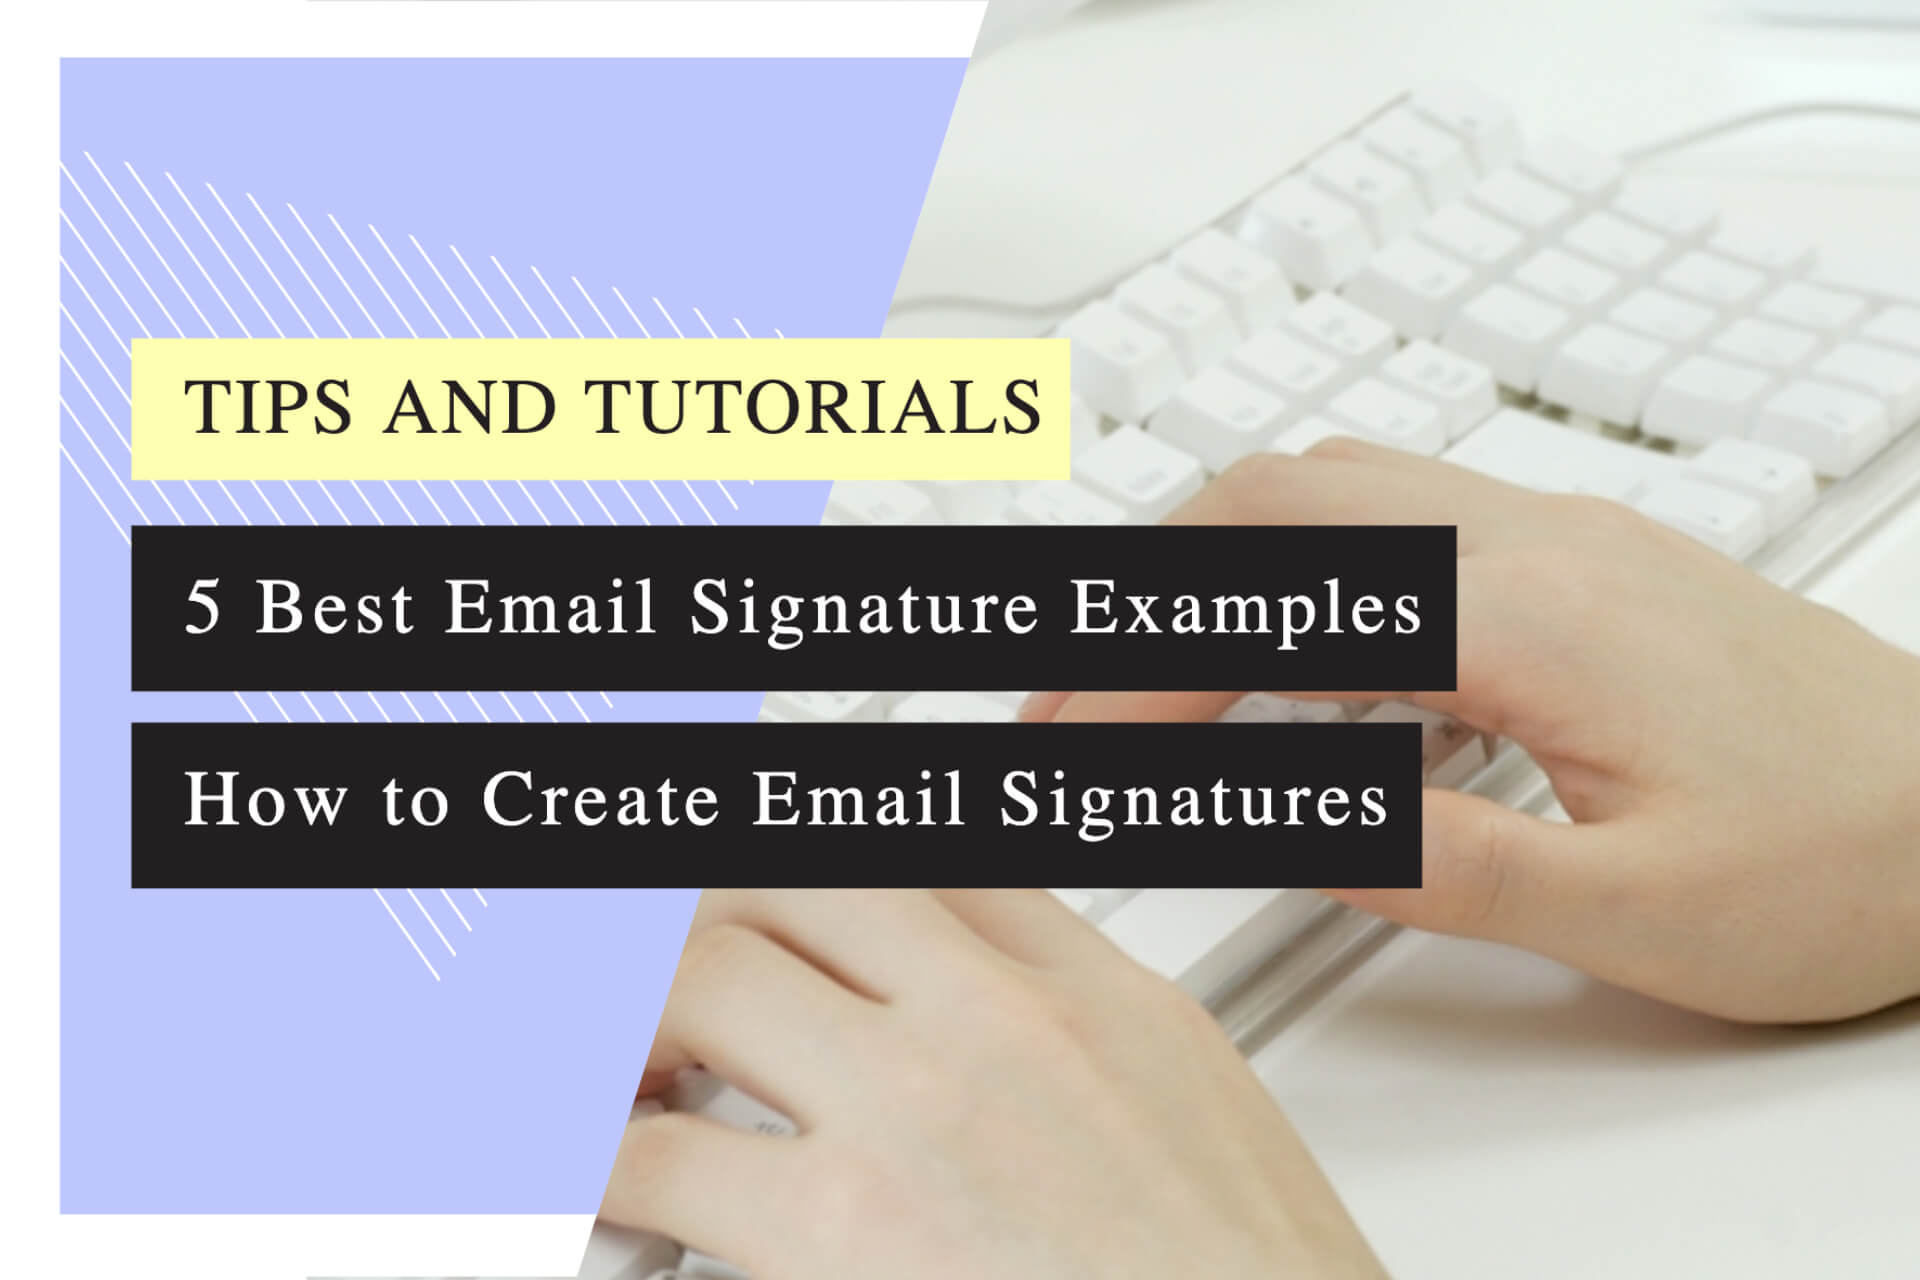 5 Best Email Signature Examples: How to Create Email Signatures that Convert